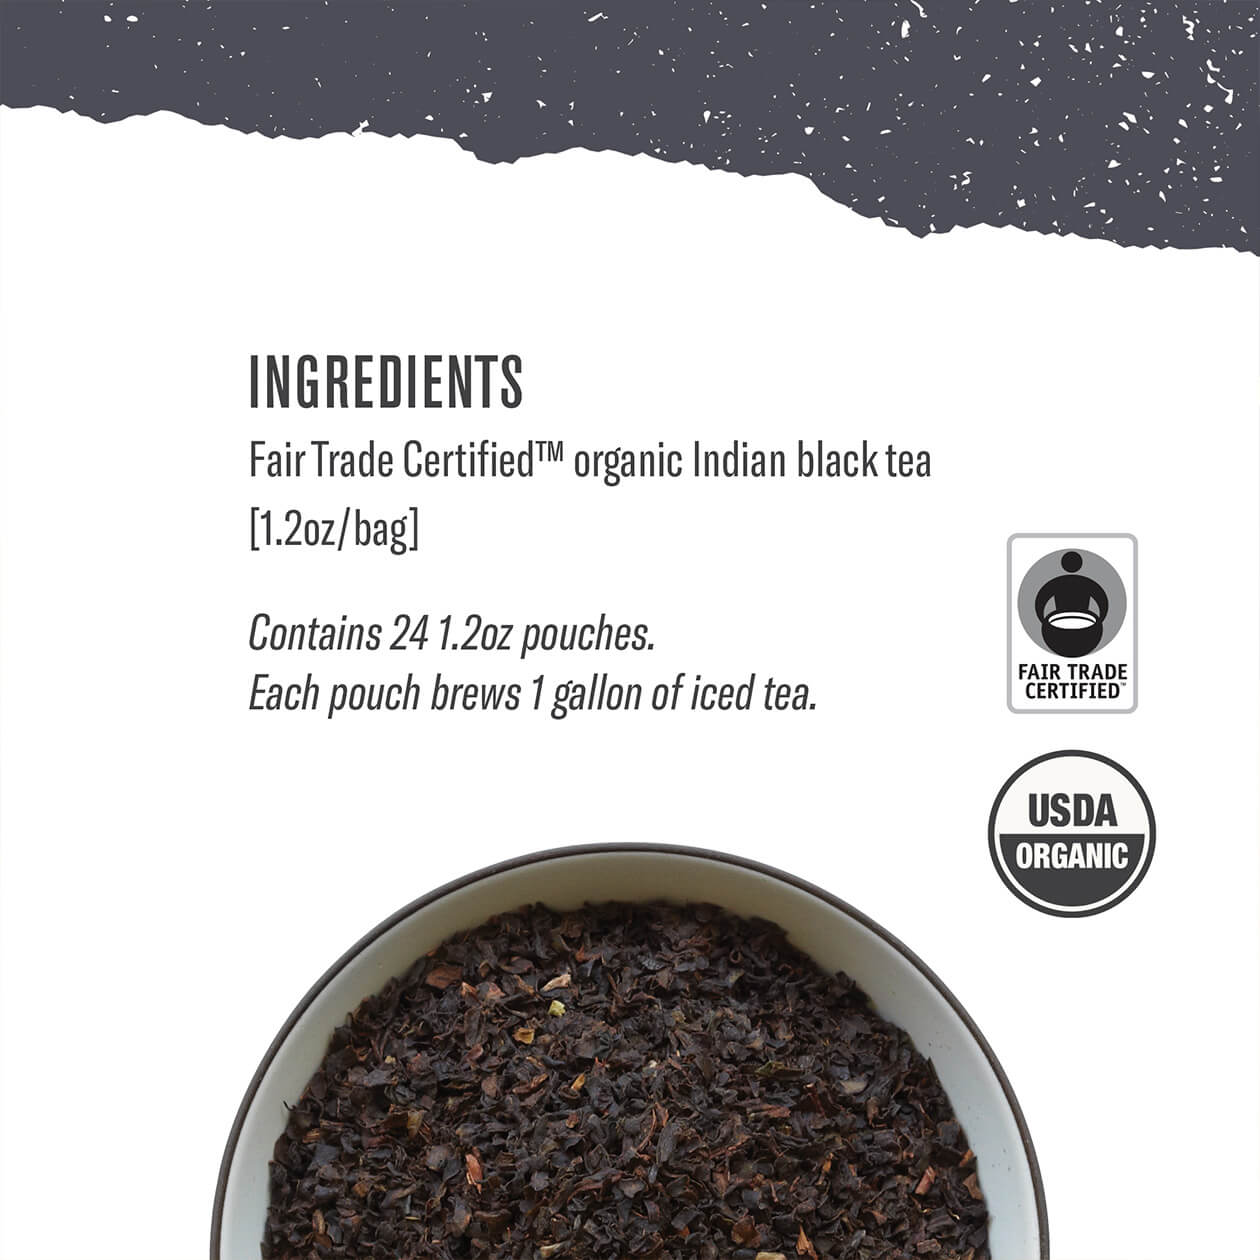 High Mountain Black Iced Tea Ingredients list and organic and Fair Trade certifications